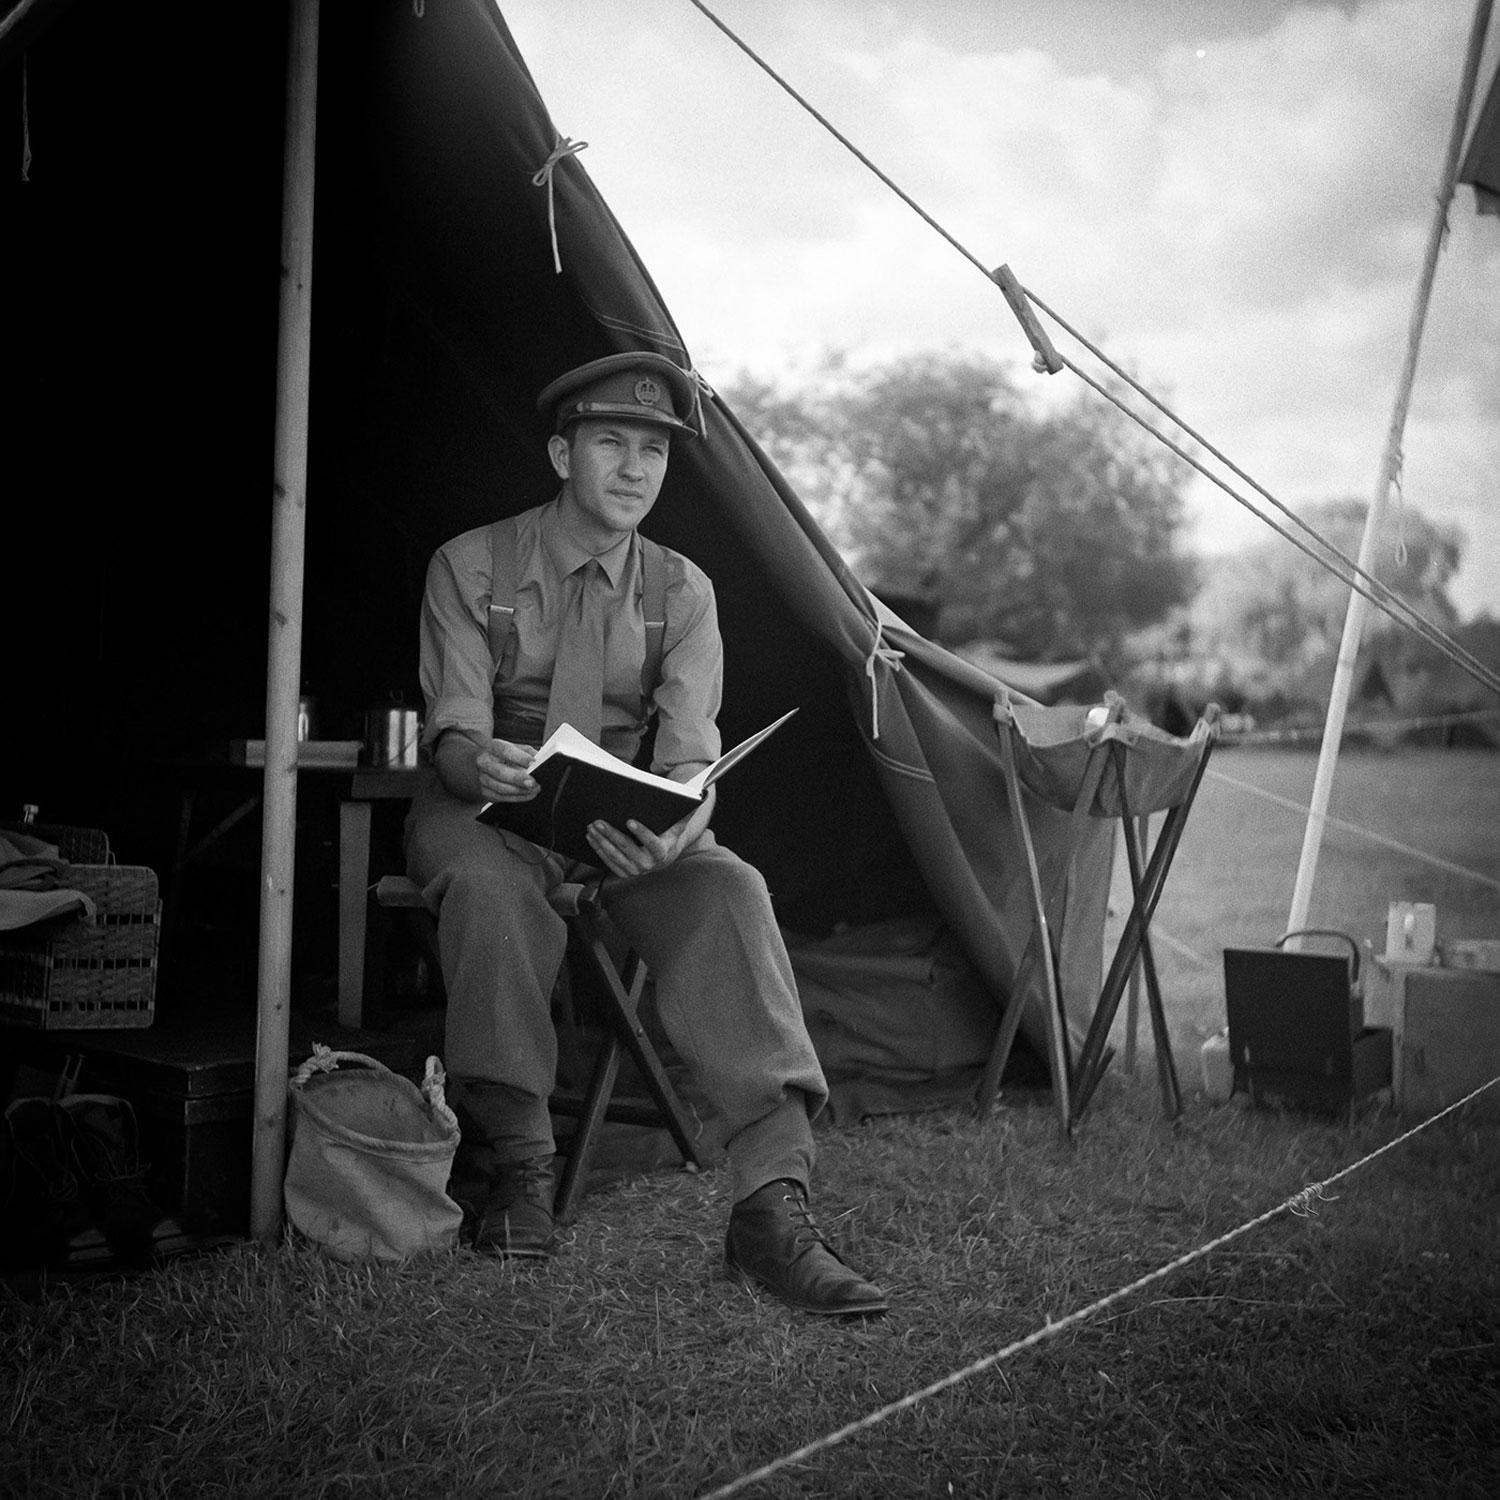 It's difficult for reenactors to find and use actual 1940s kit — original uniforms are expensive, and soldiers were shorter and thinner during World War II than your average modern day reenactor. Most of the uniforms are careful reproductions. Bradley Cooper, however, has an incredible collection of original gear (everything in his tent is from mid to late 1944). Here, he's reenacting as an Essex regiment officer with the Essex Second Battalion at Damyns Hall Aerodrome.